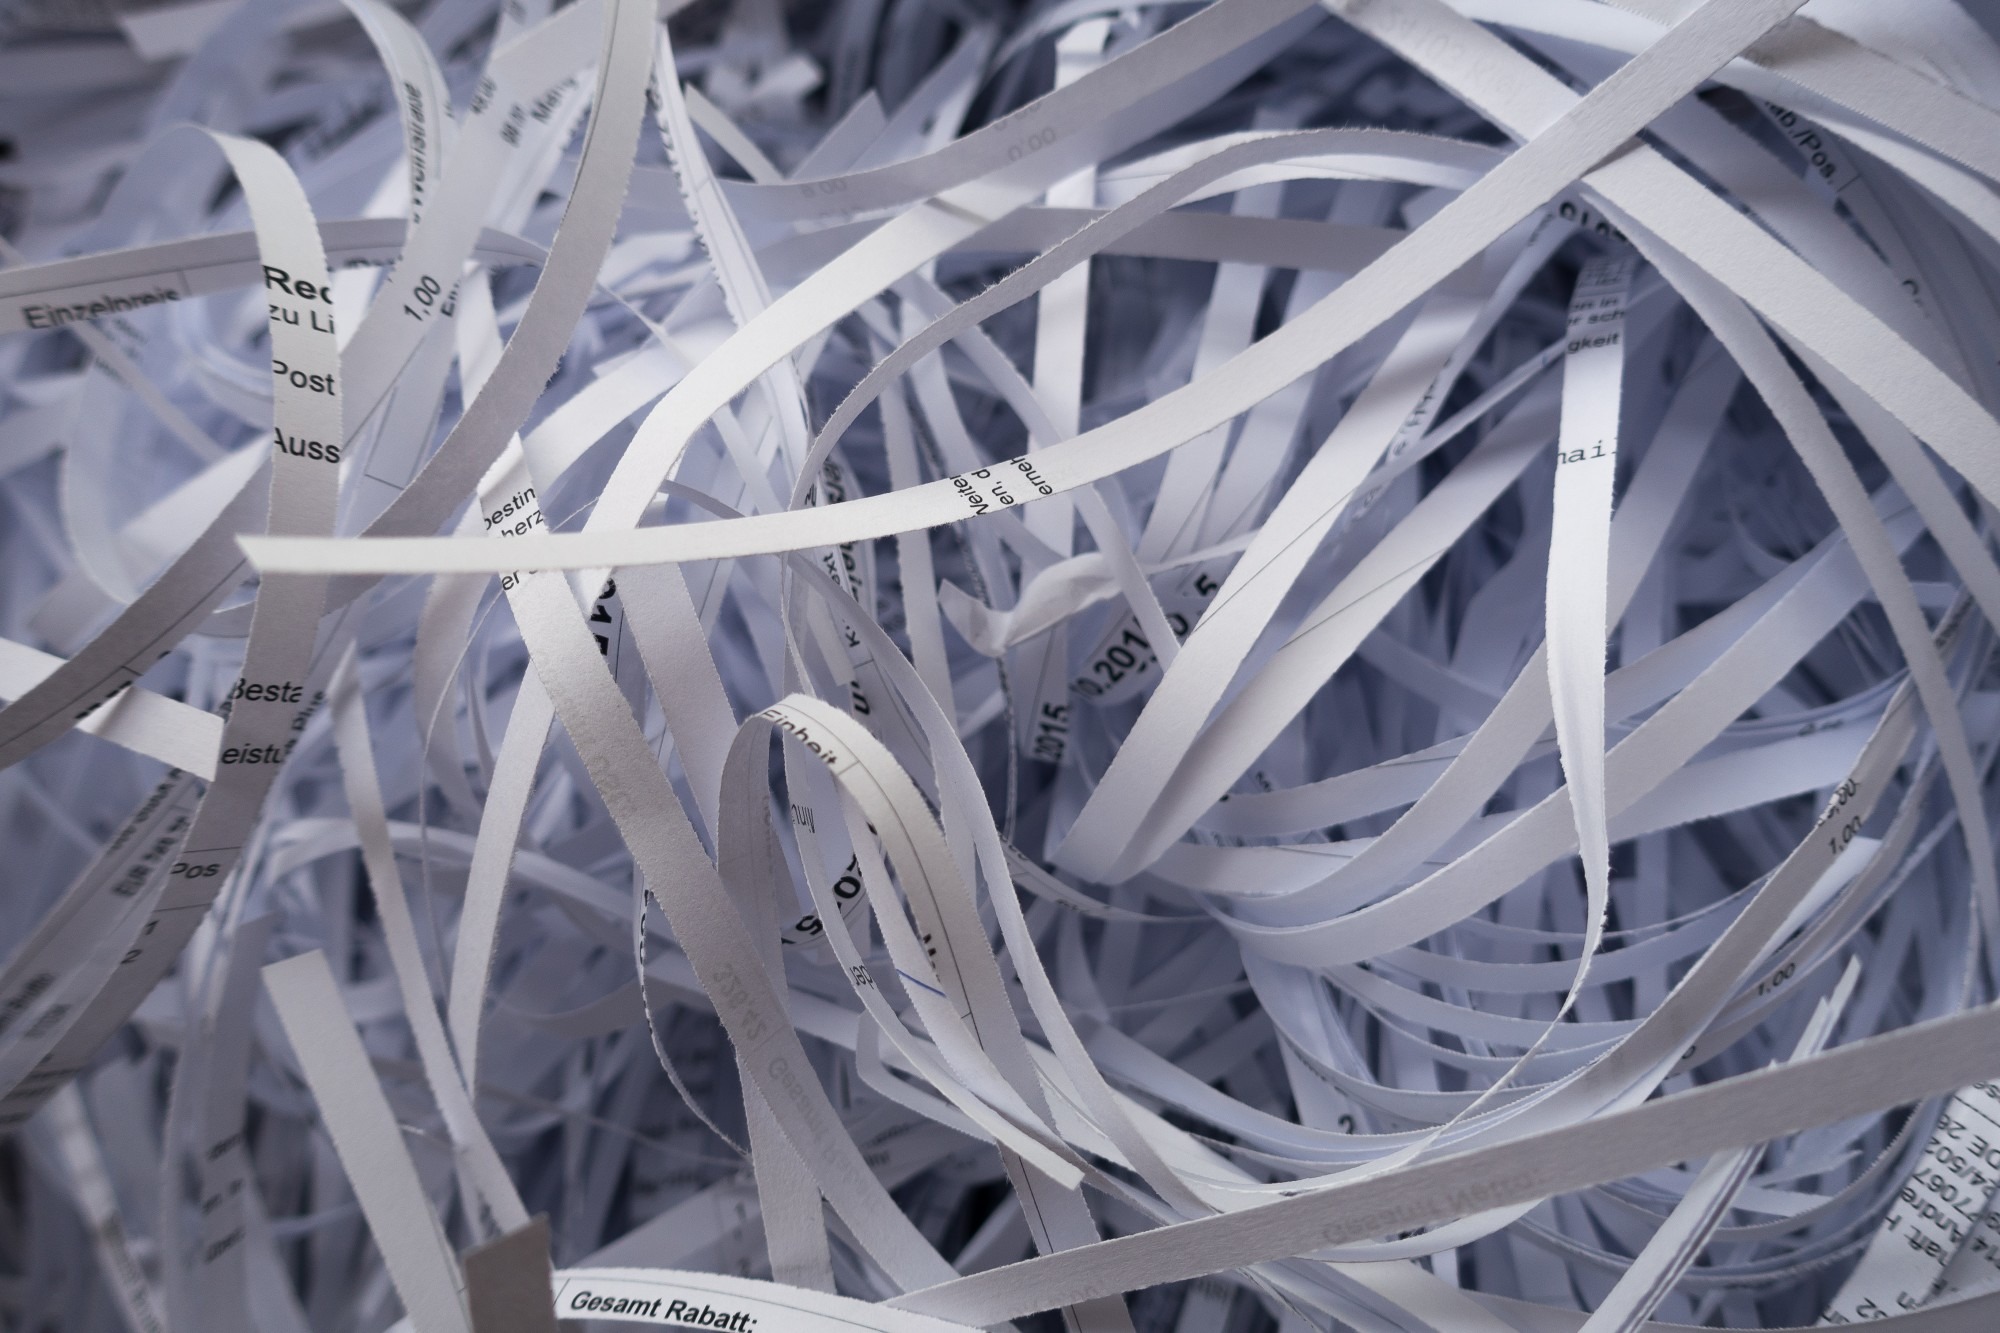 Keep Your Business Secure: The Best Shredder for Small Business